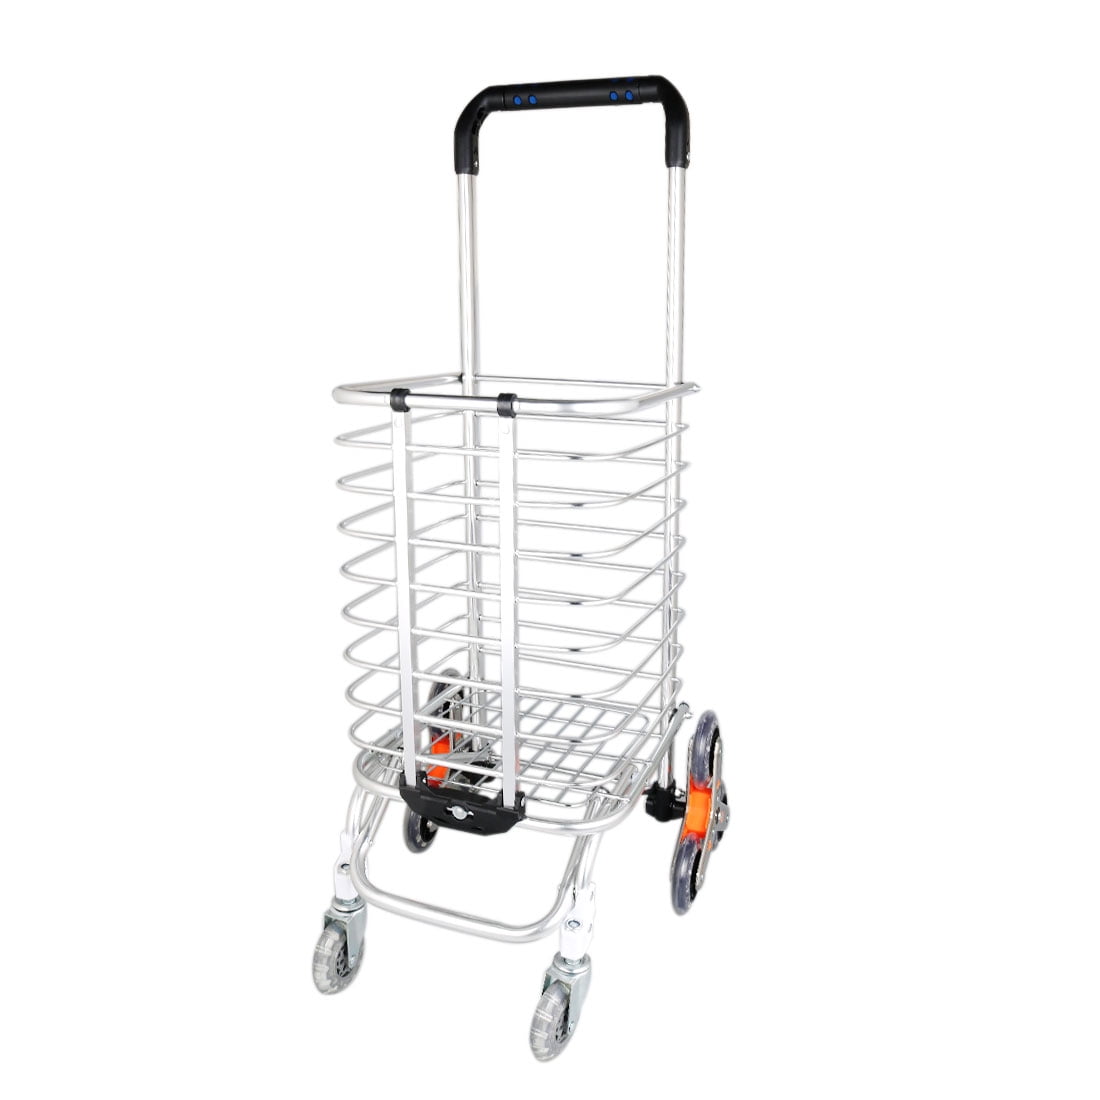 Details about   Shopping Cart Portable Utility Carts Folding Trolley Stair Climbing Cart+Wheels# 